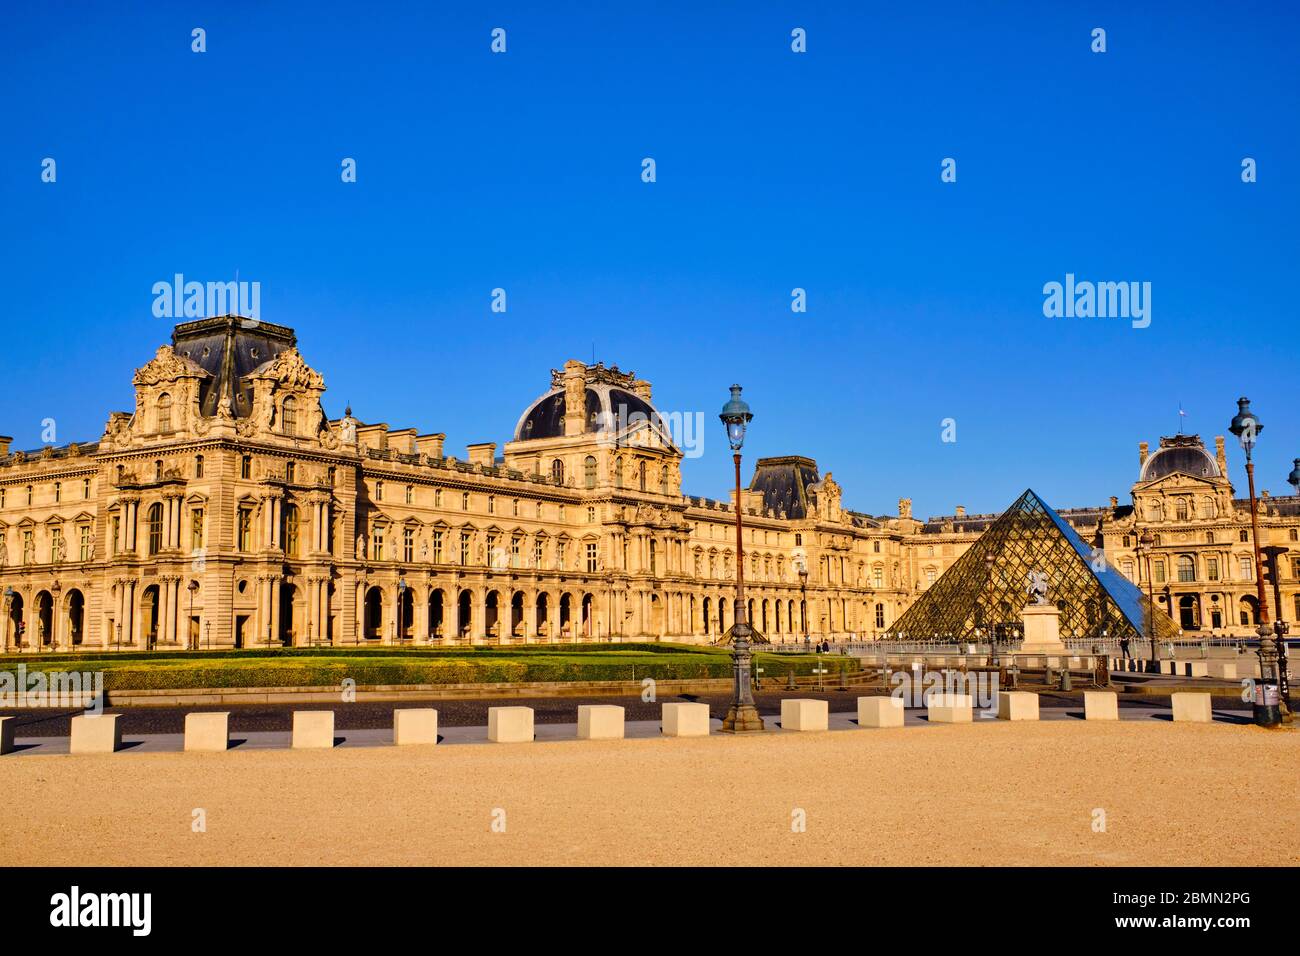 France, Paris, Louvre museum during the lockdown of Covid 19 Stock Photo